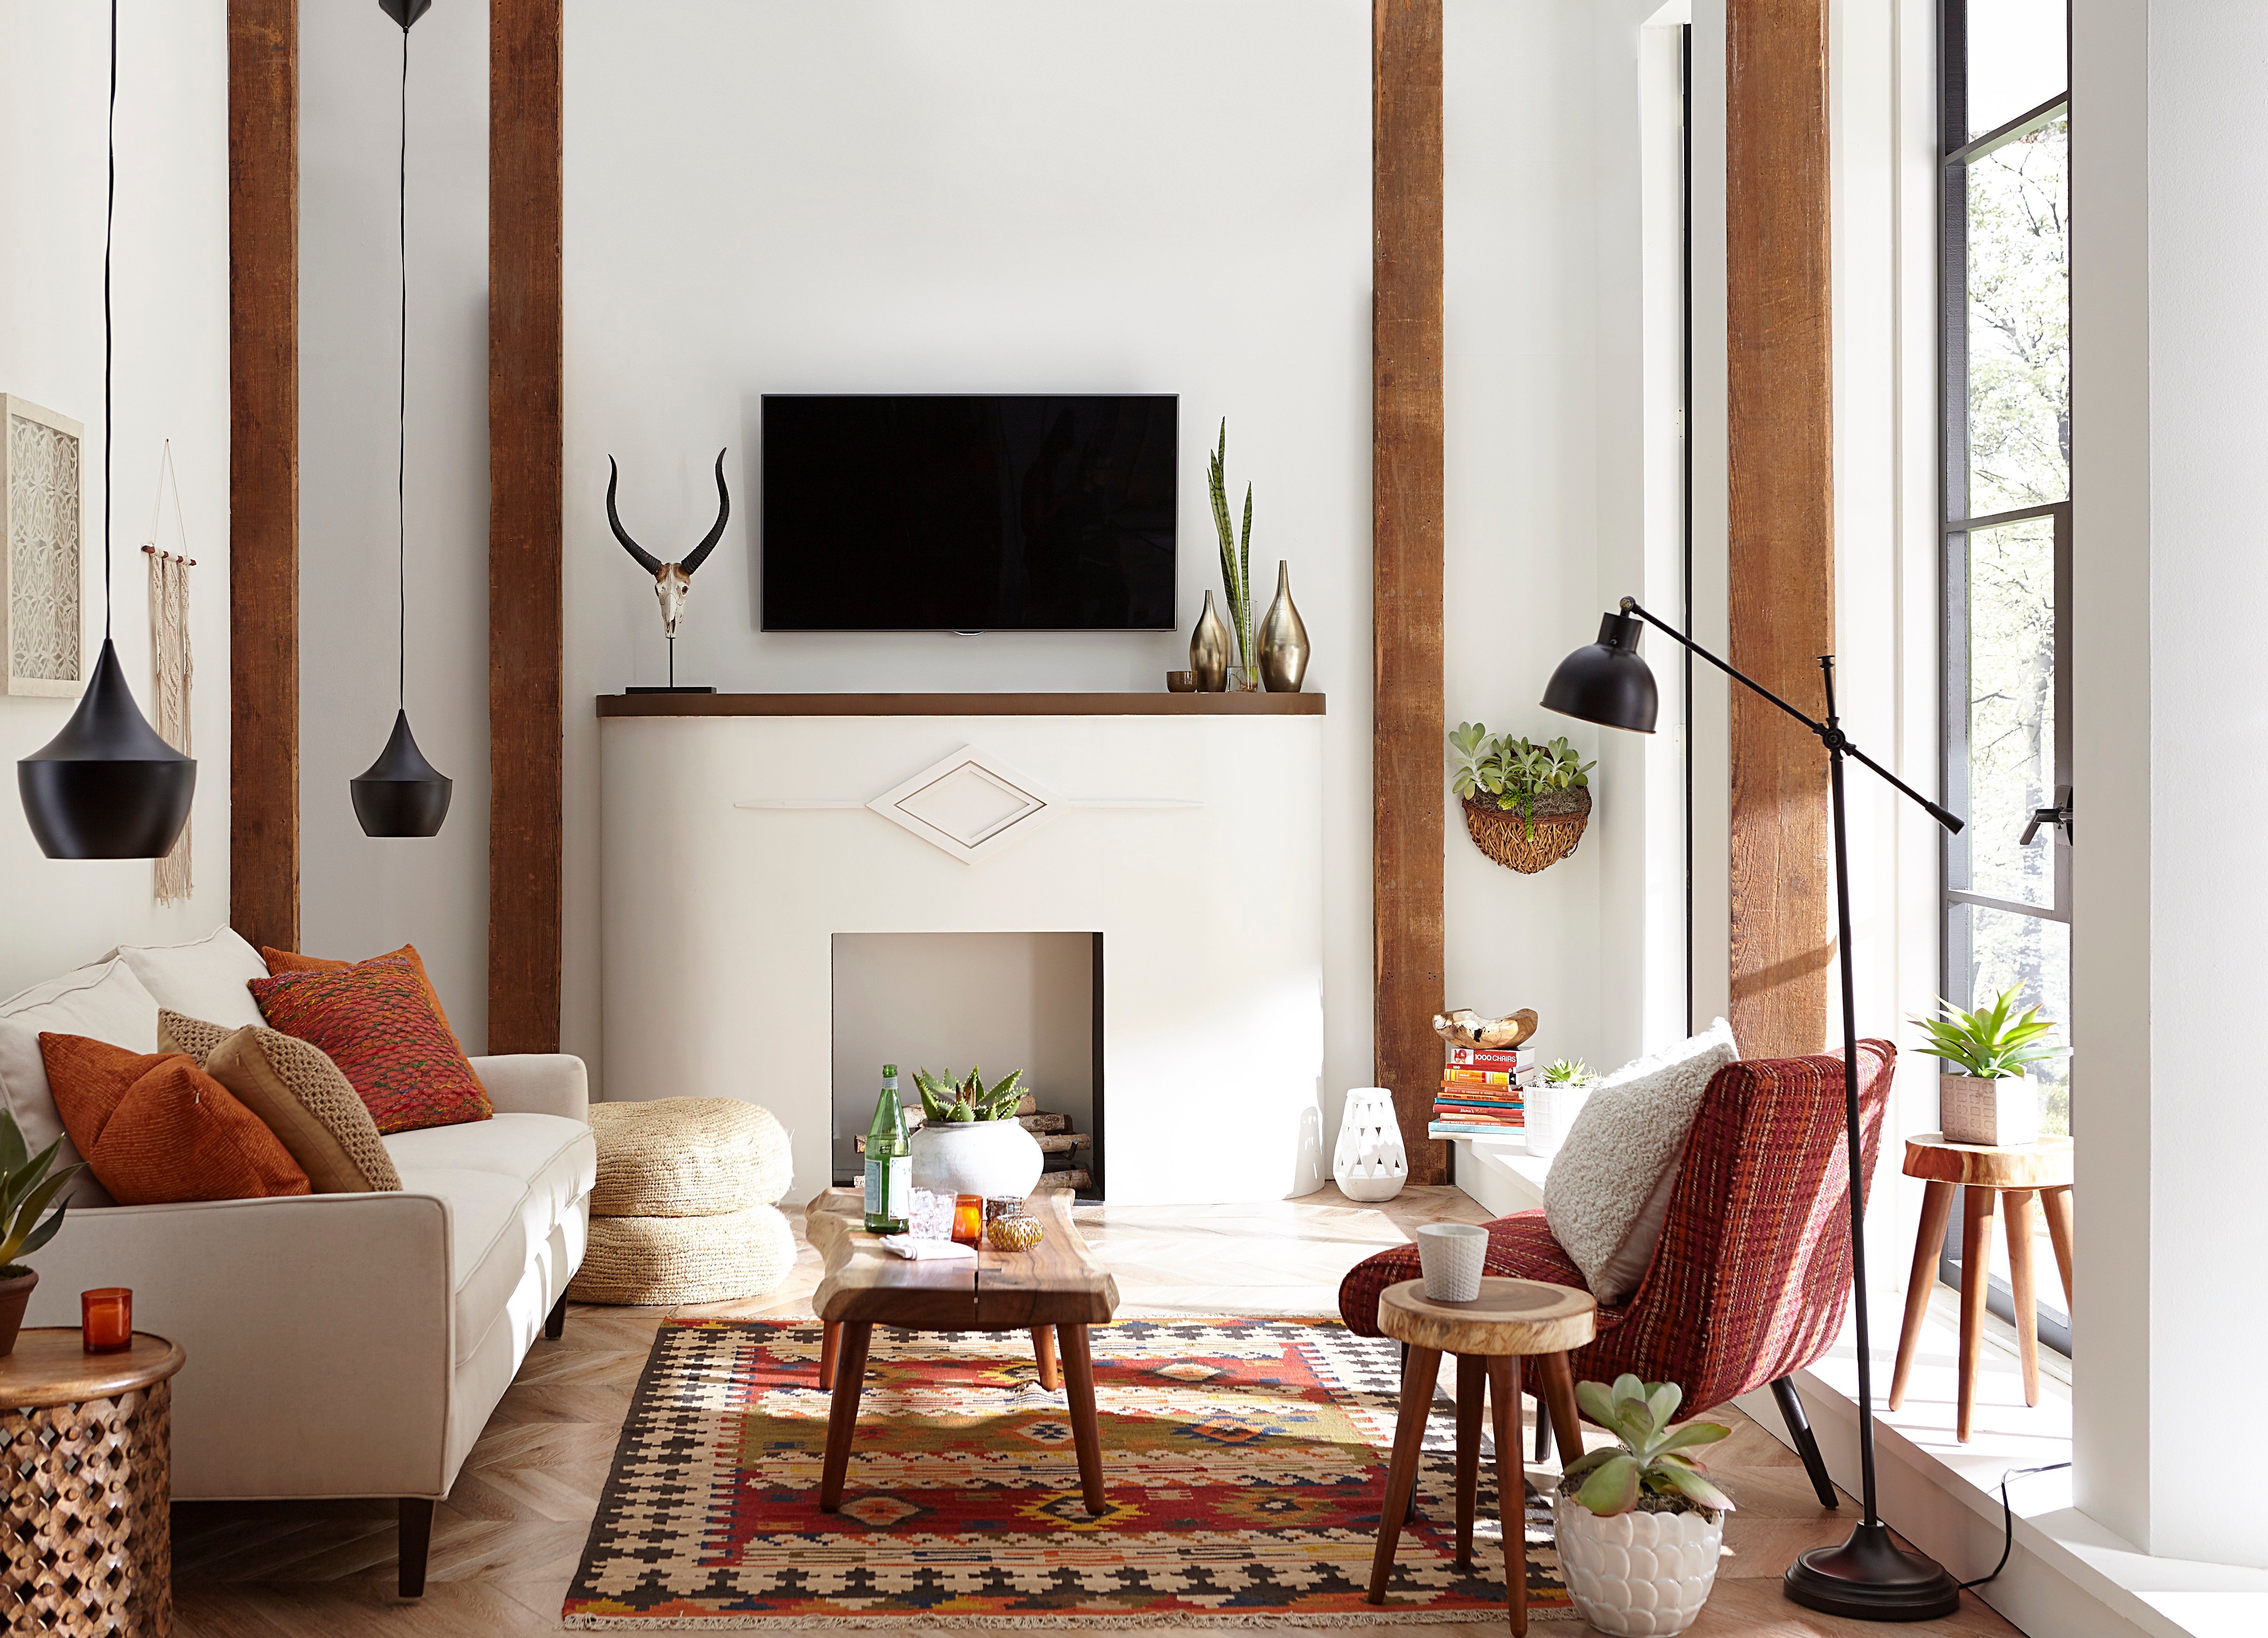 TV Mounted Above a Fireplace